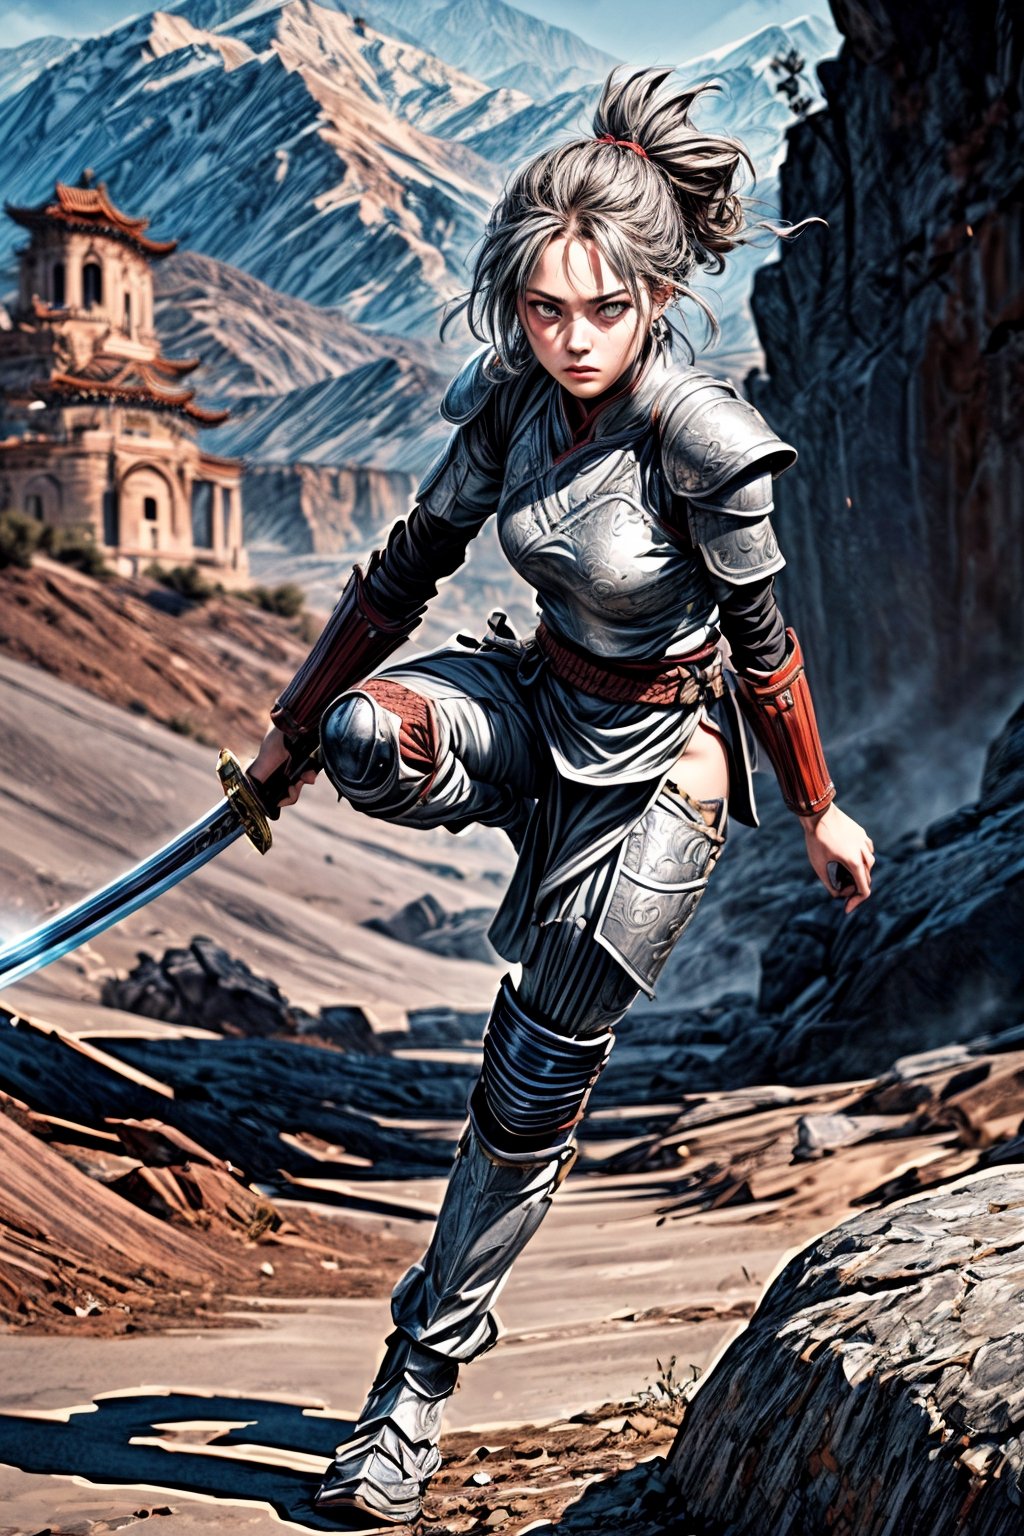 ultra high res, (masterpiece, best quality), (photorealistic:1.5), 

in a desert, (detail background: 1.3), 

1 girl jedi knight, full-body_portrait, (:1.2), 
(dynamic pose:1.1), holding a chinese sword, ready to fight, Ancient chinese heavy armor, (gray tone:1.4)